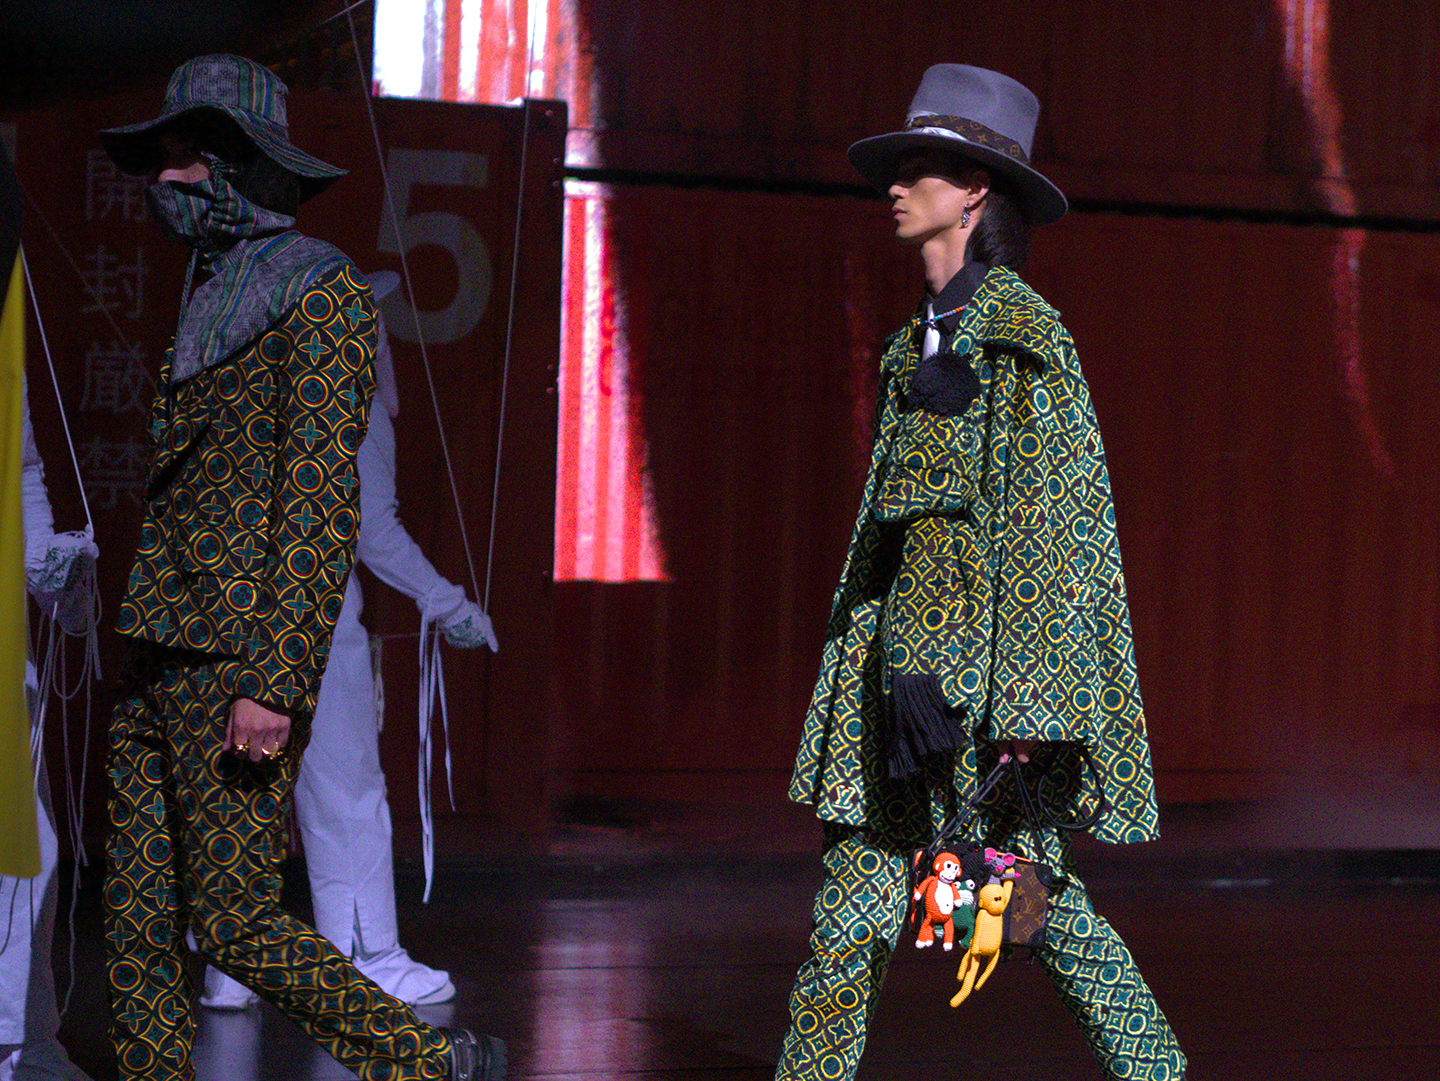 Louis Vuitton on X: #LVMenSS21 #JO1, #YojiroNoda, #HioMiyazawa, and  #AyaOmasa at the #LVMenSS21 Show. @VirgilAbloh recently presented the  second stop of his latest #LouisVuitton collection in Tokyo. Watch the  fashion show at